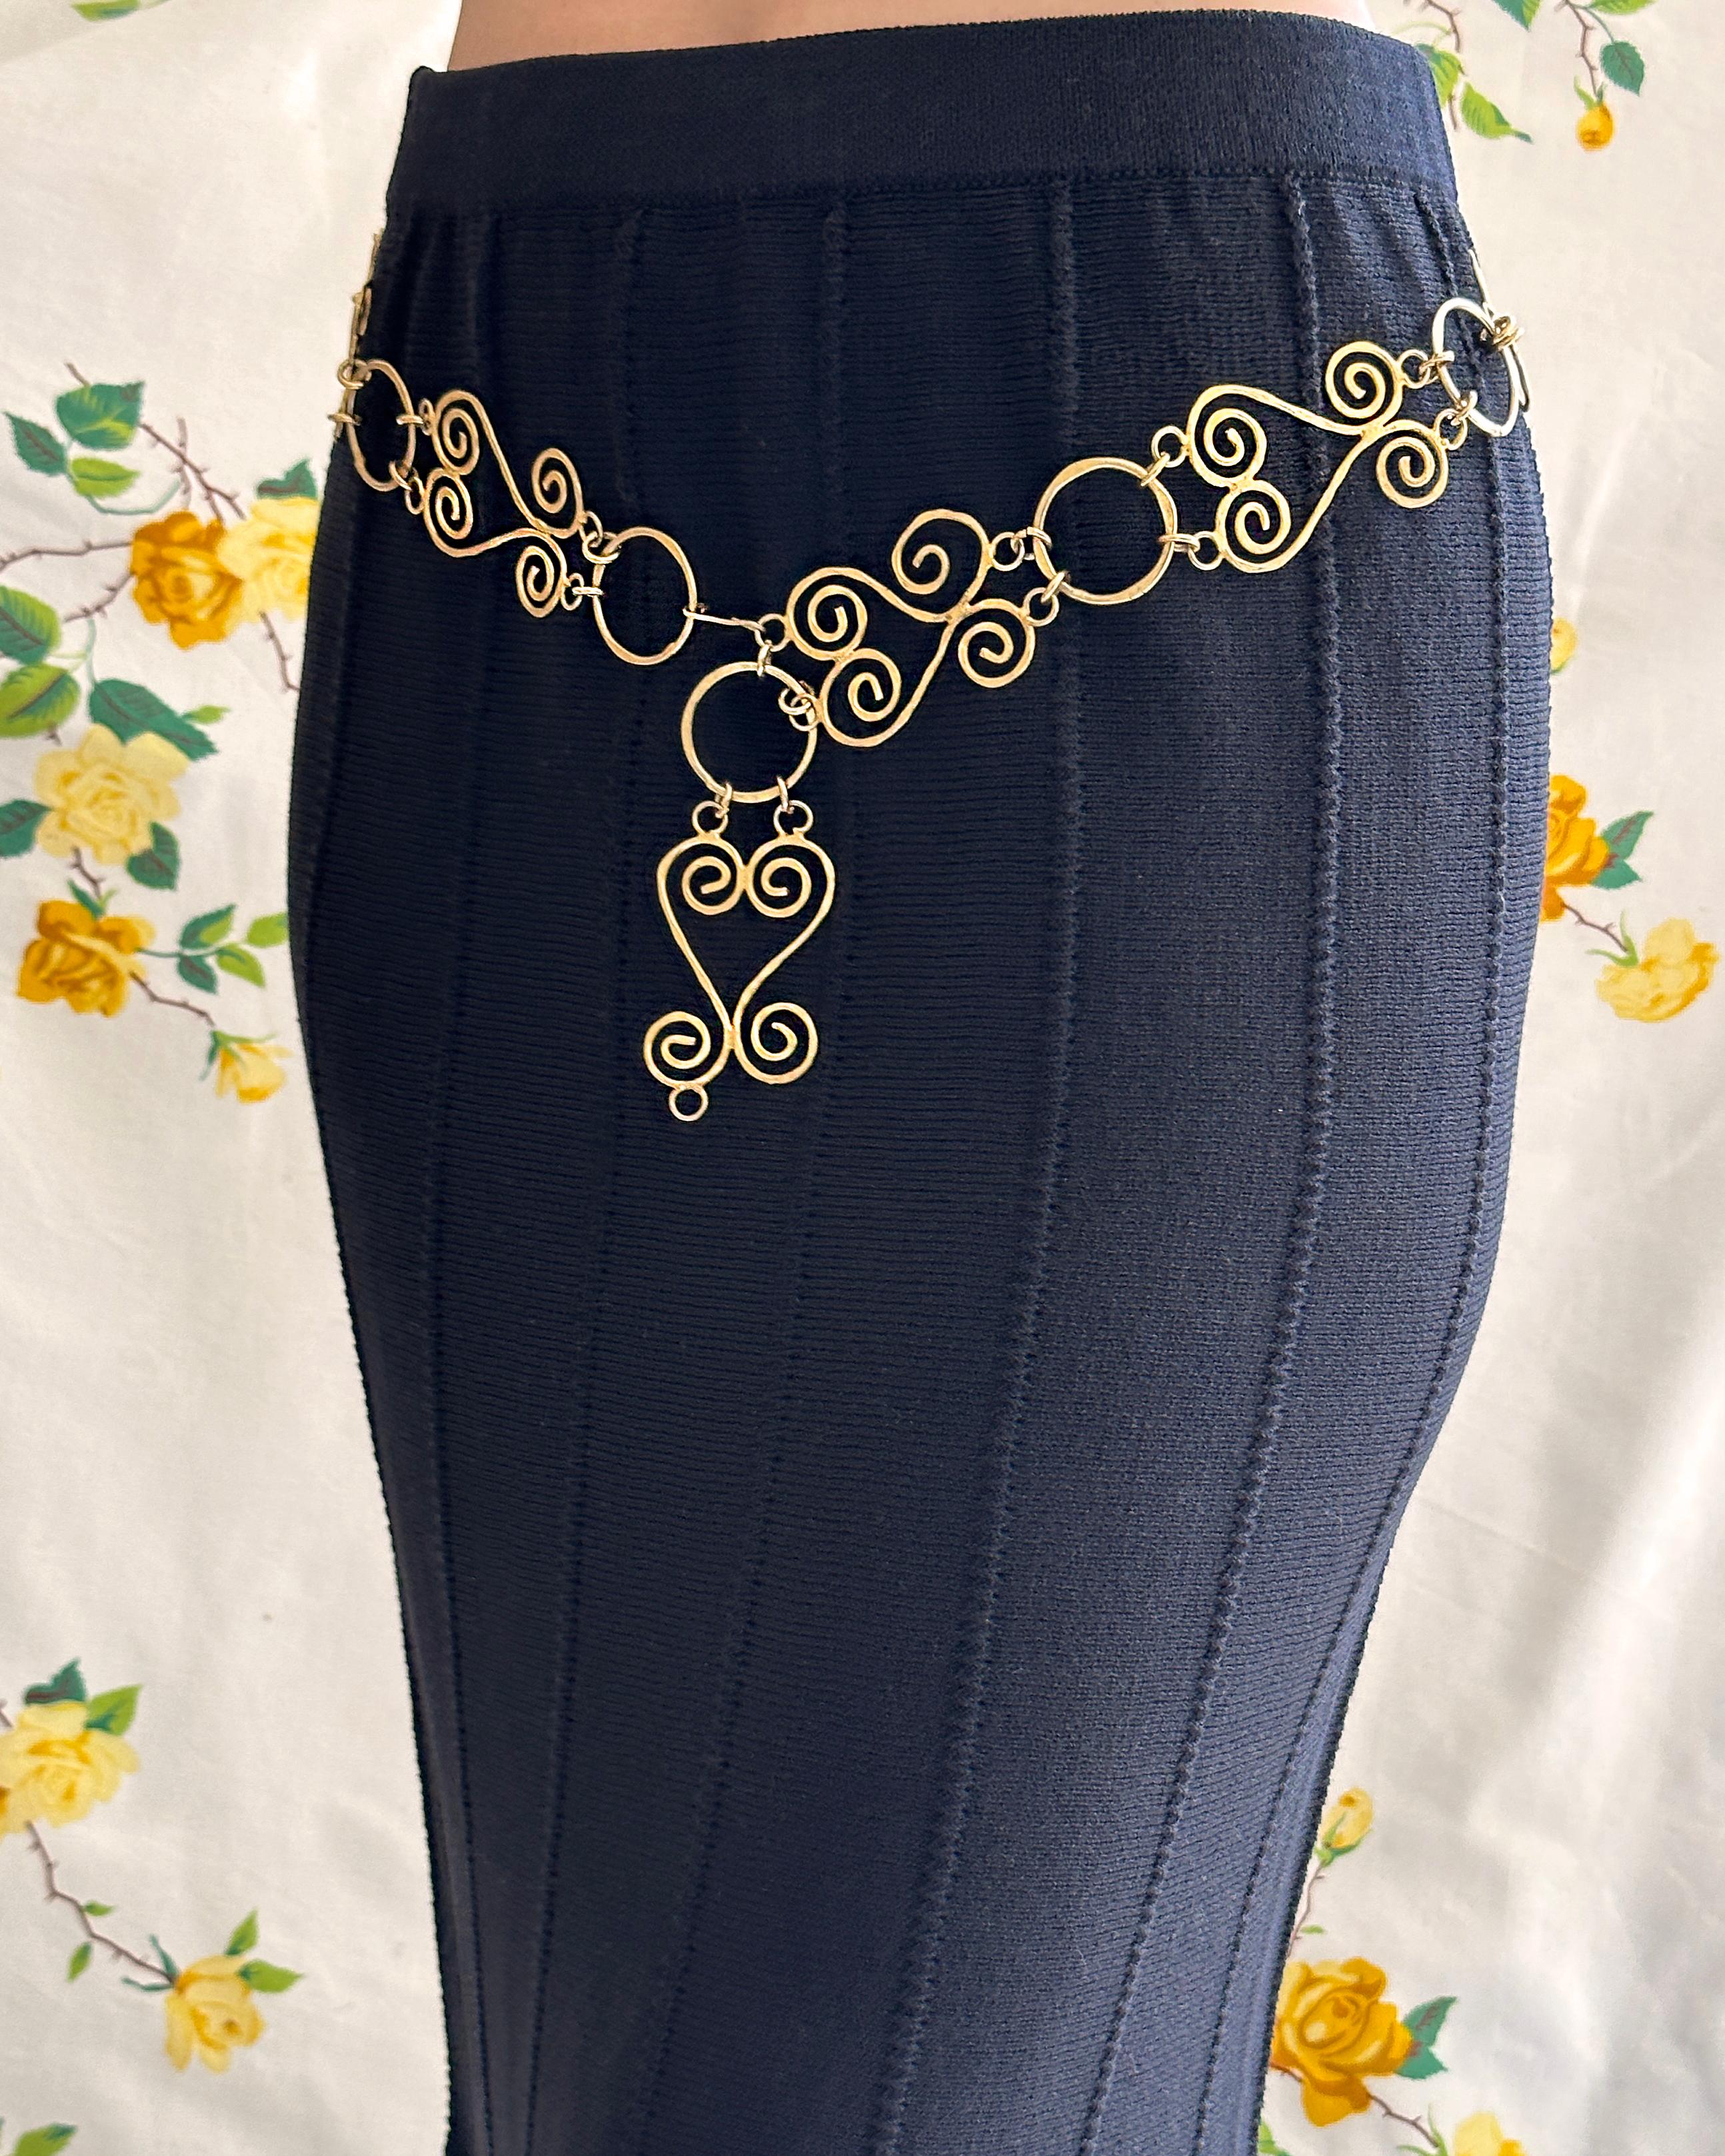 VERY BREEZY presents: This vintage chain belt feels straight off a 90s Chanel runway; it's really unlike any other I've seen. It features a sculptural swirling motif in a hammered matte gold. The hook clasp can connect to any link, which means this